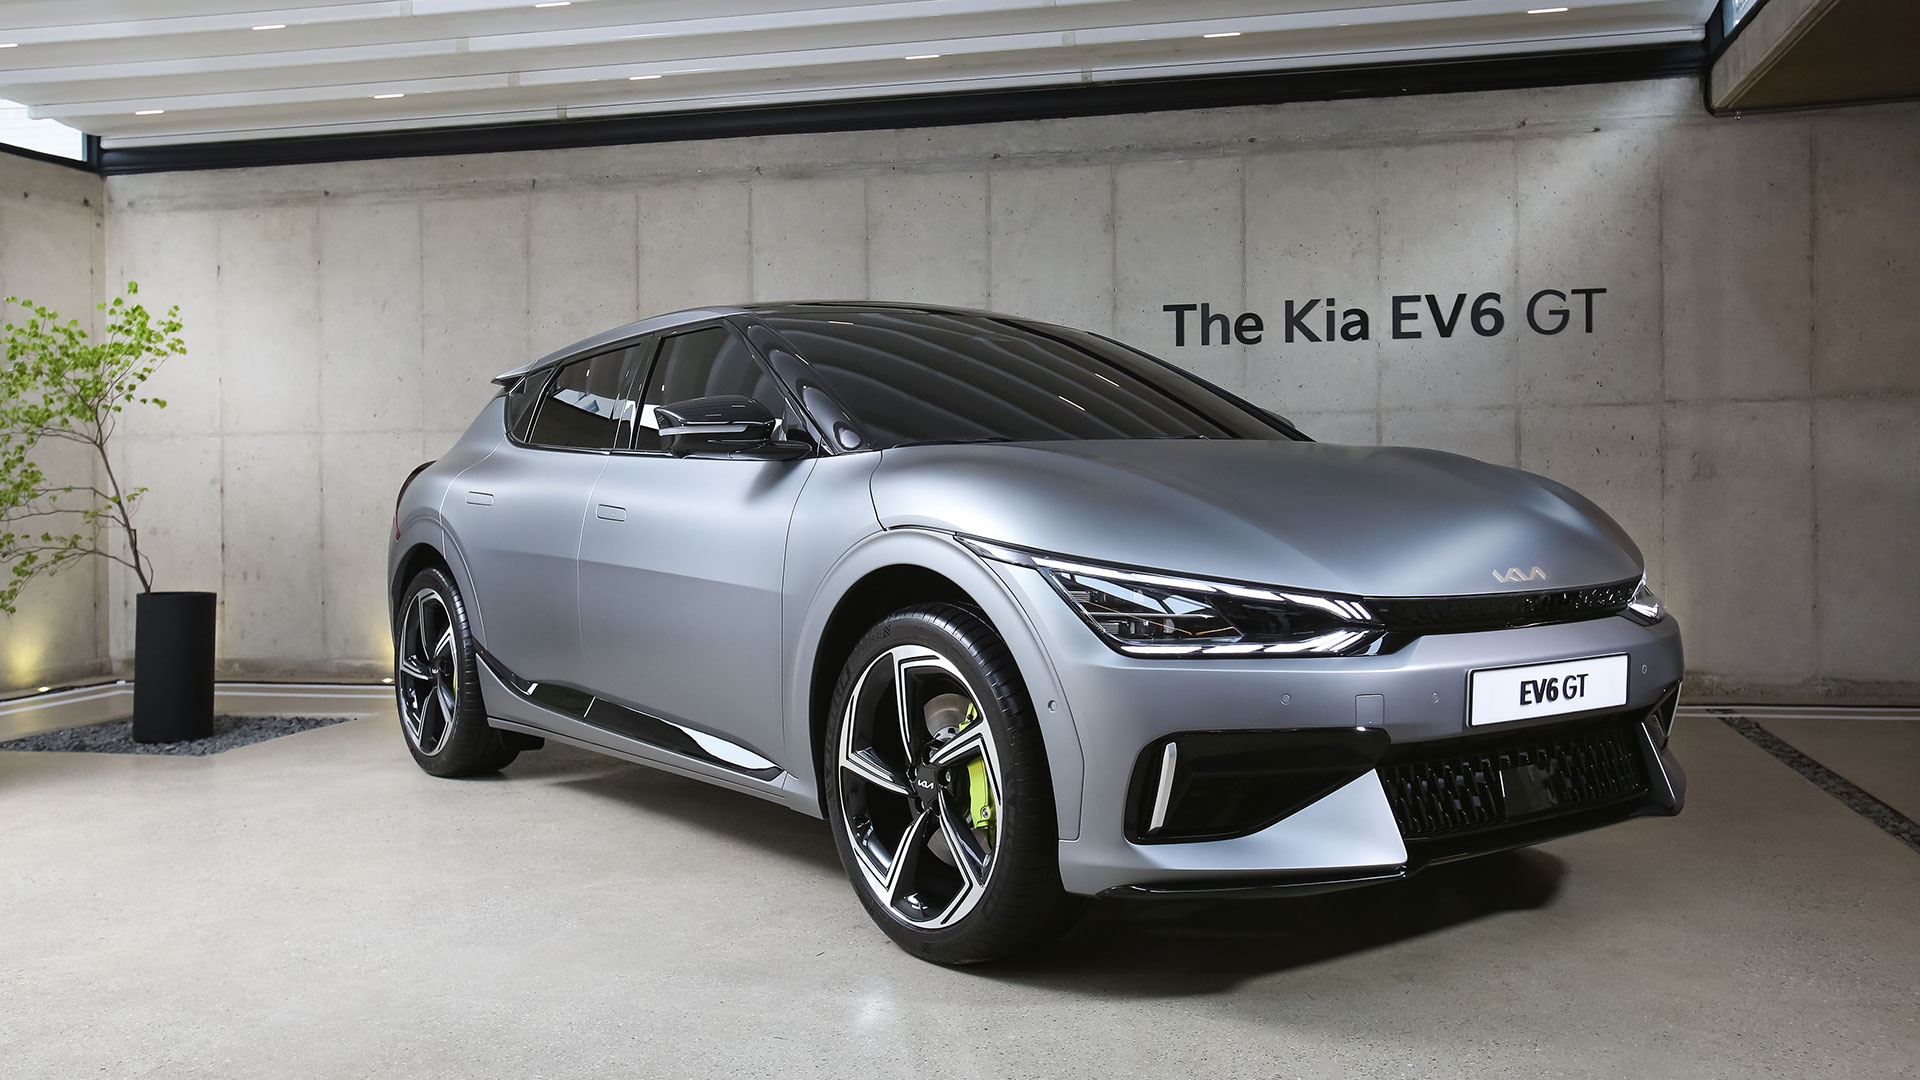 KIA: Price 60 lakh for New EV6 Electric (Bookings open)